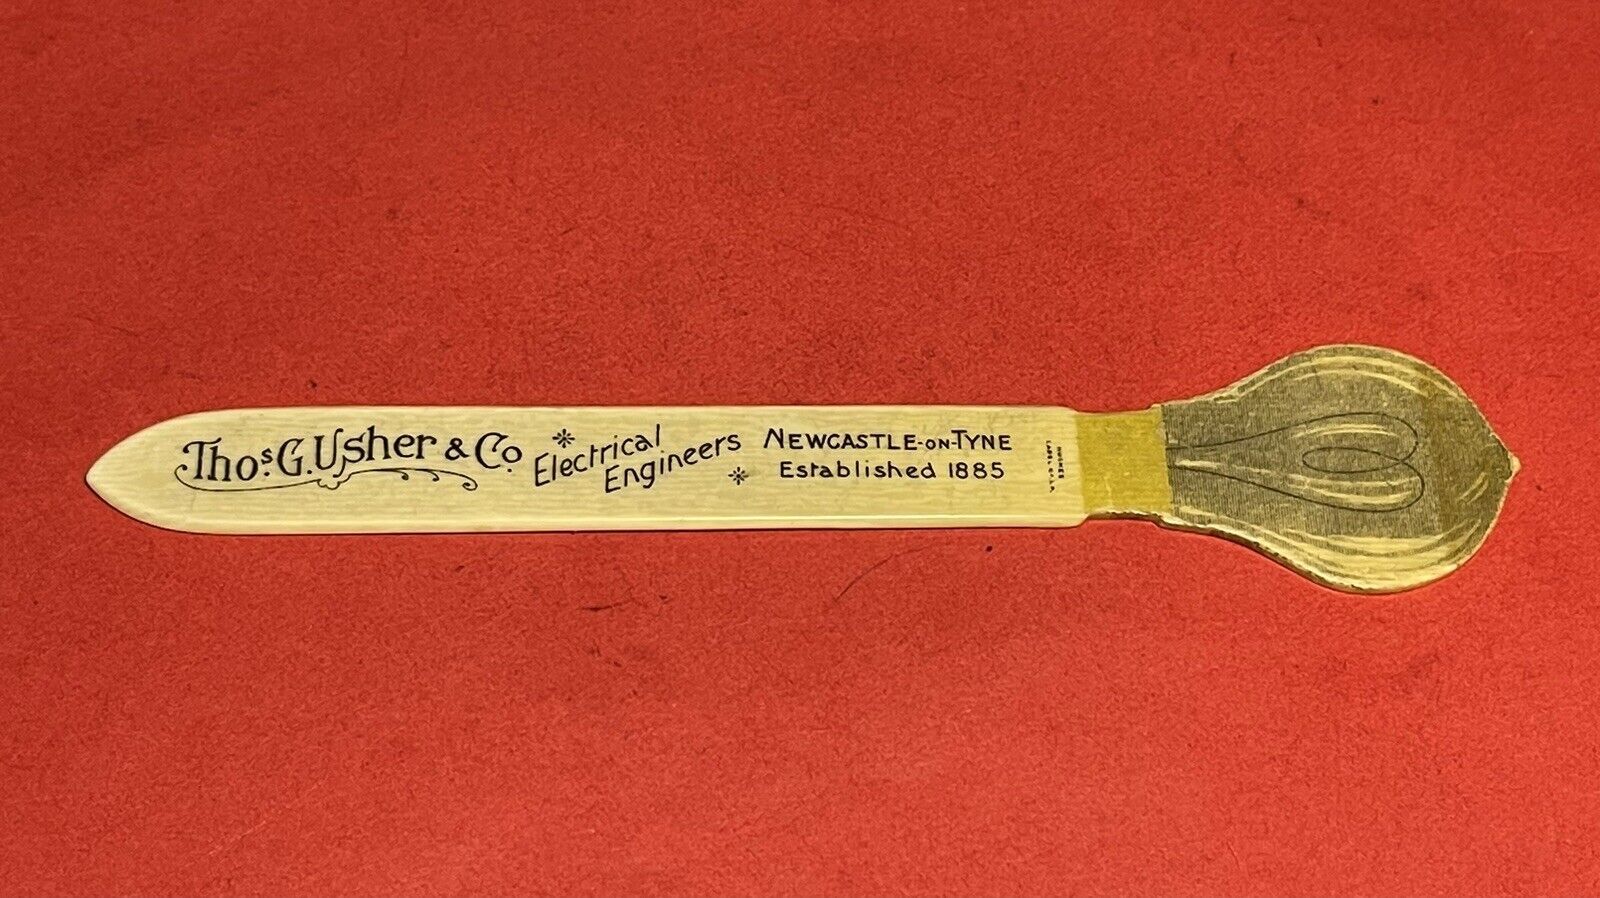 EARLY 1900s THOS USHER ELECTRICAL ENGINEER ADVERT CELLULOID PAPER KNIFE-BOOKMARK